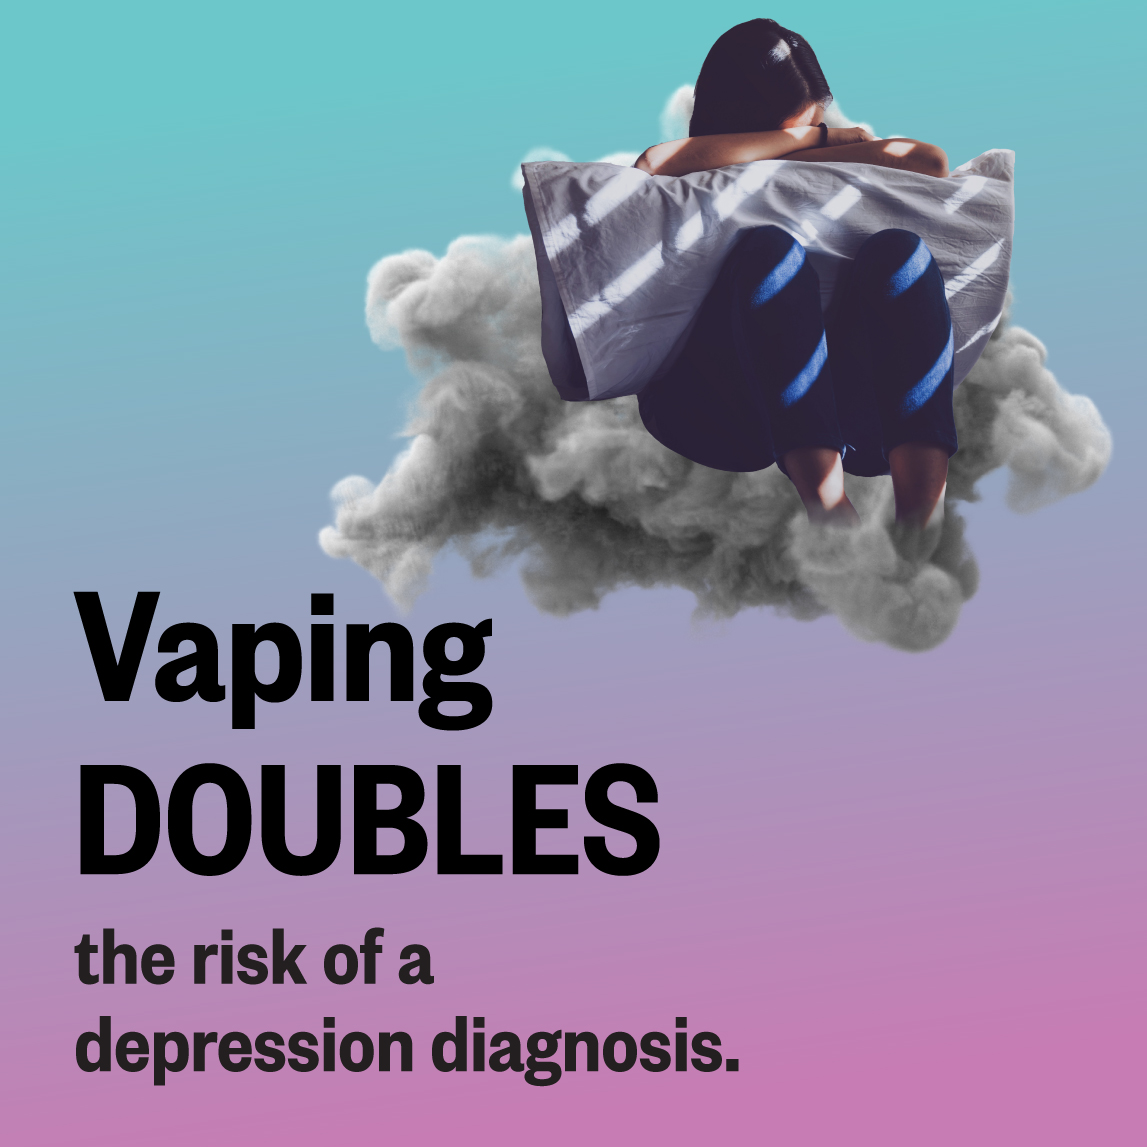 Vaping DOUBLES the risk of a depression diagnosis.